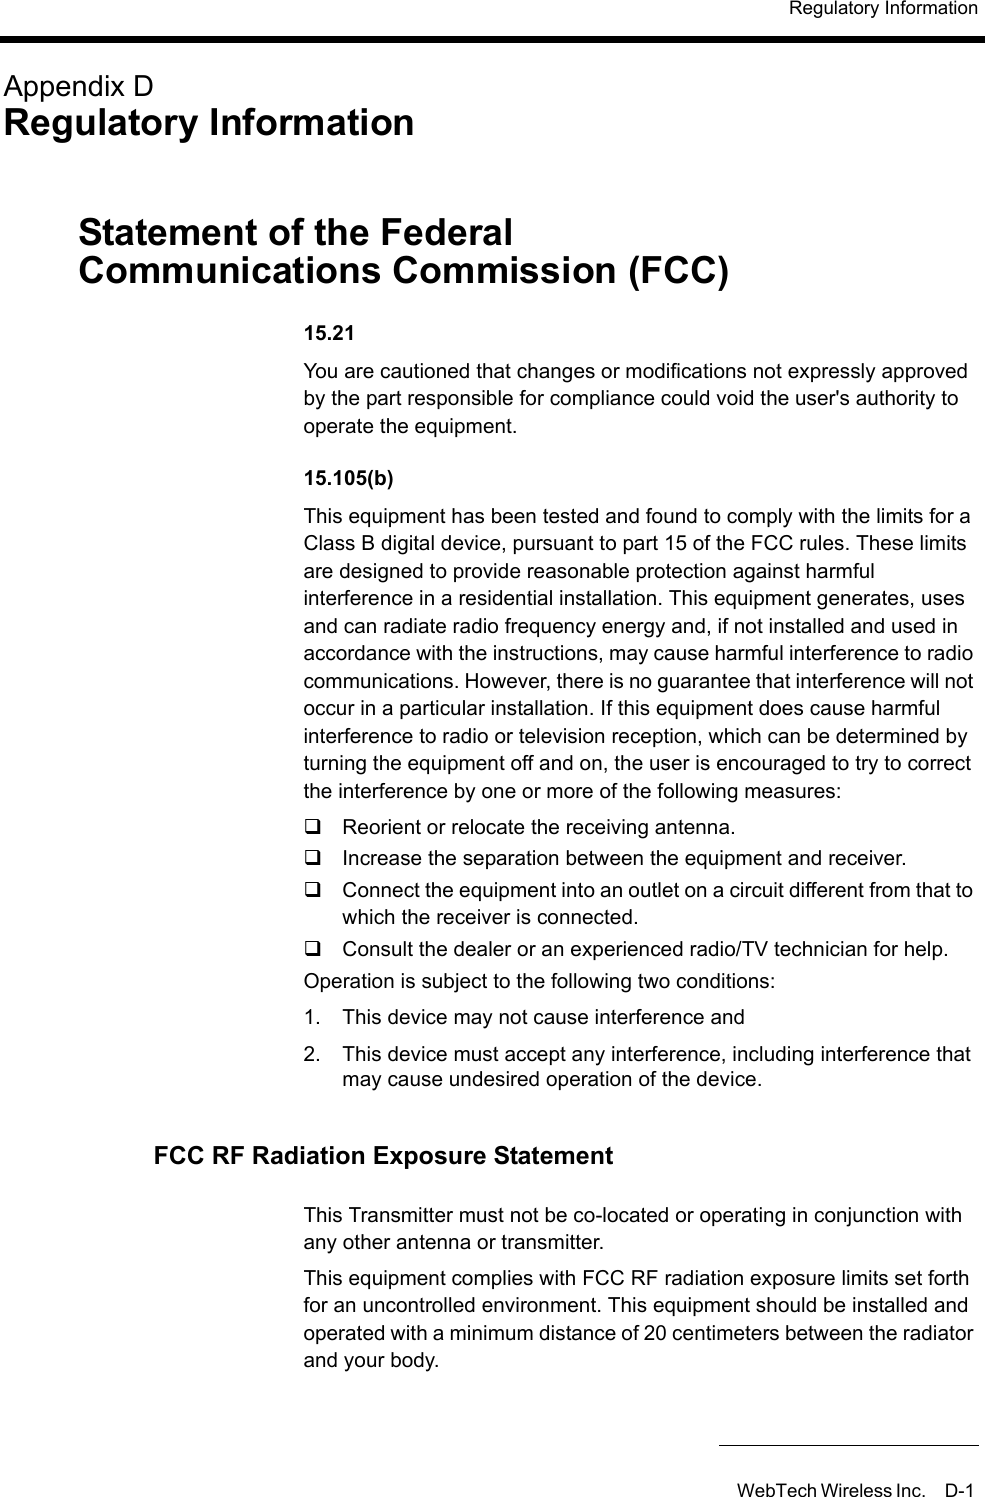 Regulatory InformationWebTech Wireless Inc. D-1 Appendix DRegulatory InformationStatement of the Federal Communications Commission (FCC) 15.21You are cautioned that changes or modifications not expressly approved by the part responsible for compliance could void the user&apos;s authority to operate the equipment.15.105(b)This equipment has been tested and found to comply with the limits for a Class B digital device, pursuant to part 15 of the FCC rules. These limits are designed to provide reasonable protection against harmful interference in a residential installation. This equipment generates, uses and can radiate radio frequency energy and, if not installed and used in accordance with the instructions, may cause harmful interference to radio communications. However, there is no guarantee that interference will not occur in a particular installation. If this equipment does cause harmful interference to radio or television reception, which can be determined by turning the equipment off and on, the user is encouraged to try to correct the interference by one or more of the following measures:Reorient or relocate the receiving antenna.Increase the separation between the equipment and receiver.Connect the equipment into an outlet on a circuit different from that to which the receiver is connected.Consult the dealer or an experienced radio/TV technician for help.Operation is subject to the following two conditions:1. This device may not cause interference and2. This device must accept any interference, including interference that may cause undesired operation of the device.FCC RF Radiation Exposure StatementThis Transmitter must not be co-located or operating in conjunction with any other antenna or transmitter.This equipment complies with FCC RF radiation exposure limits set forth for an uncontrolled environment. This equipment should be installed and operated with a minimum distance of 20 centimeters between the radiator and your body.